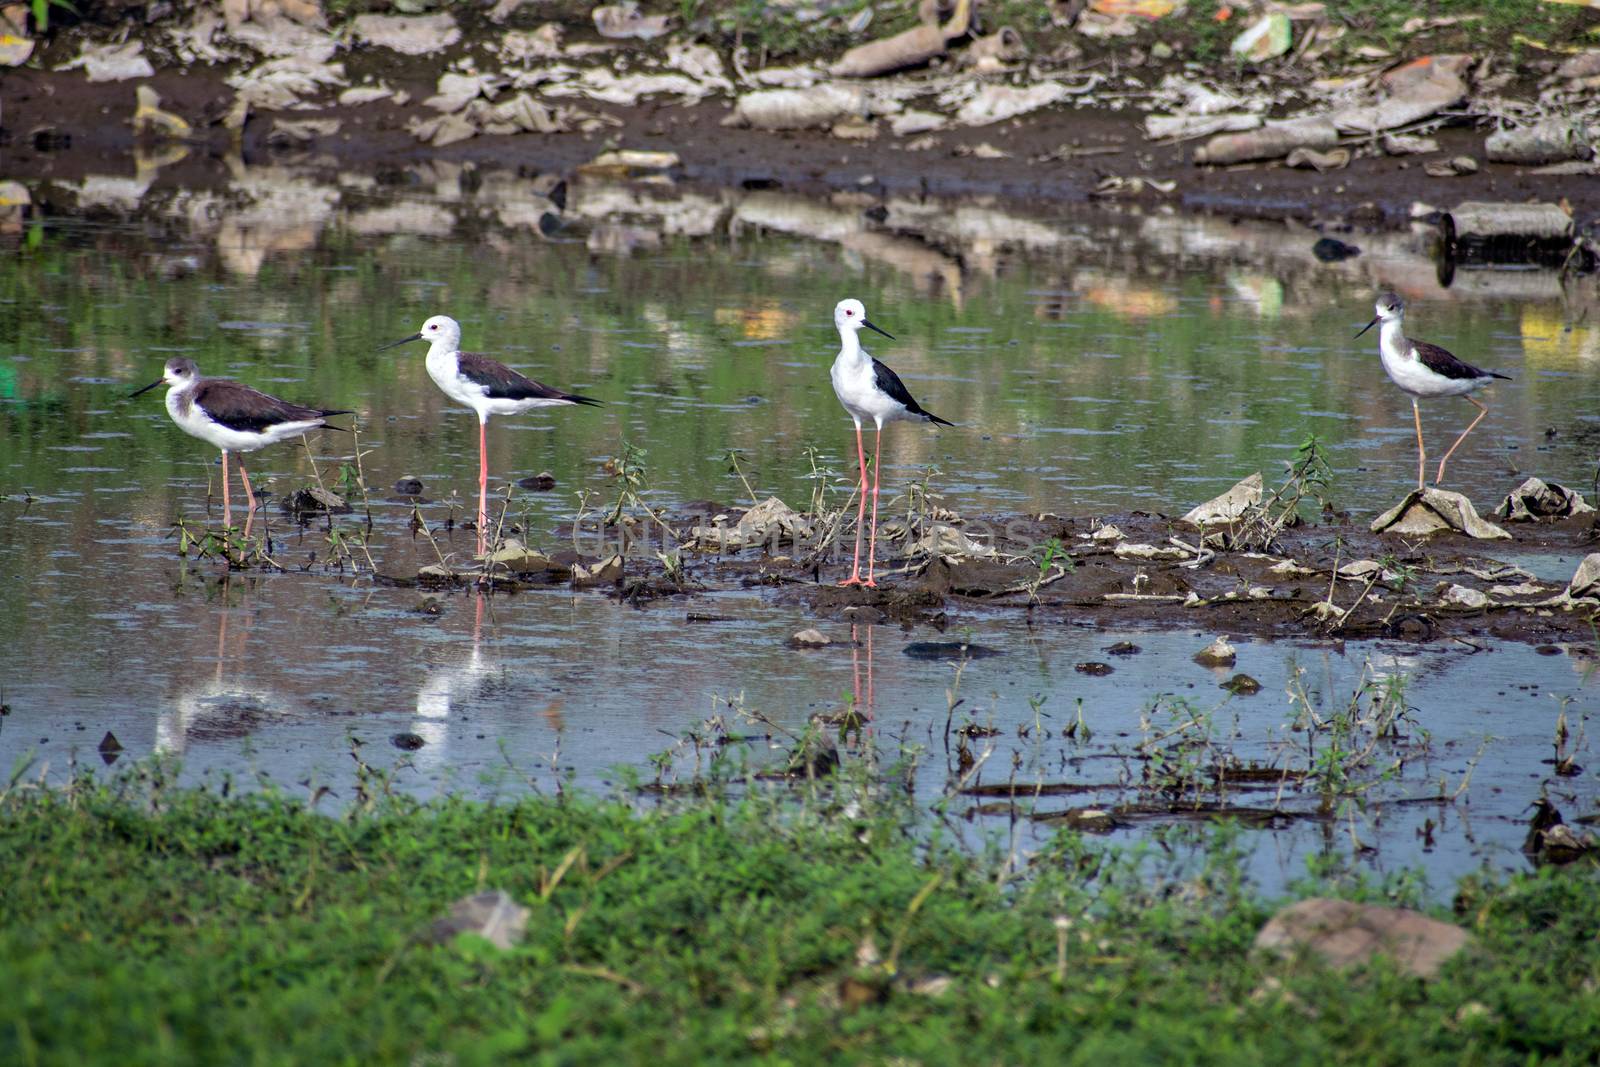 A group of four Black-winged Stilt searching food on river bank., Daund, Maharashtra, India by lalam